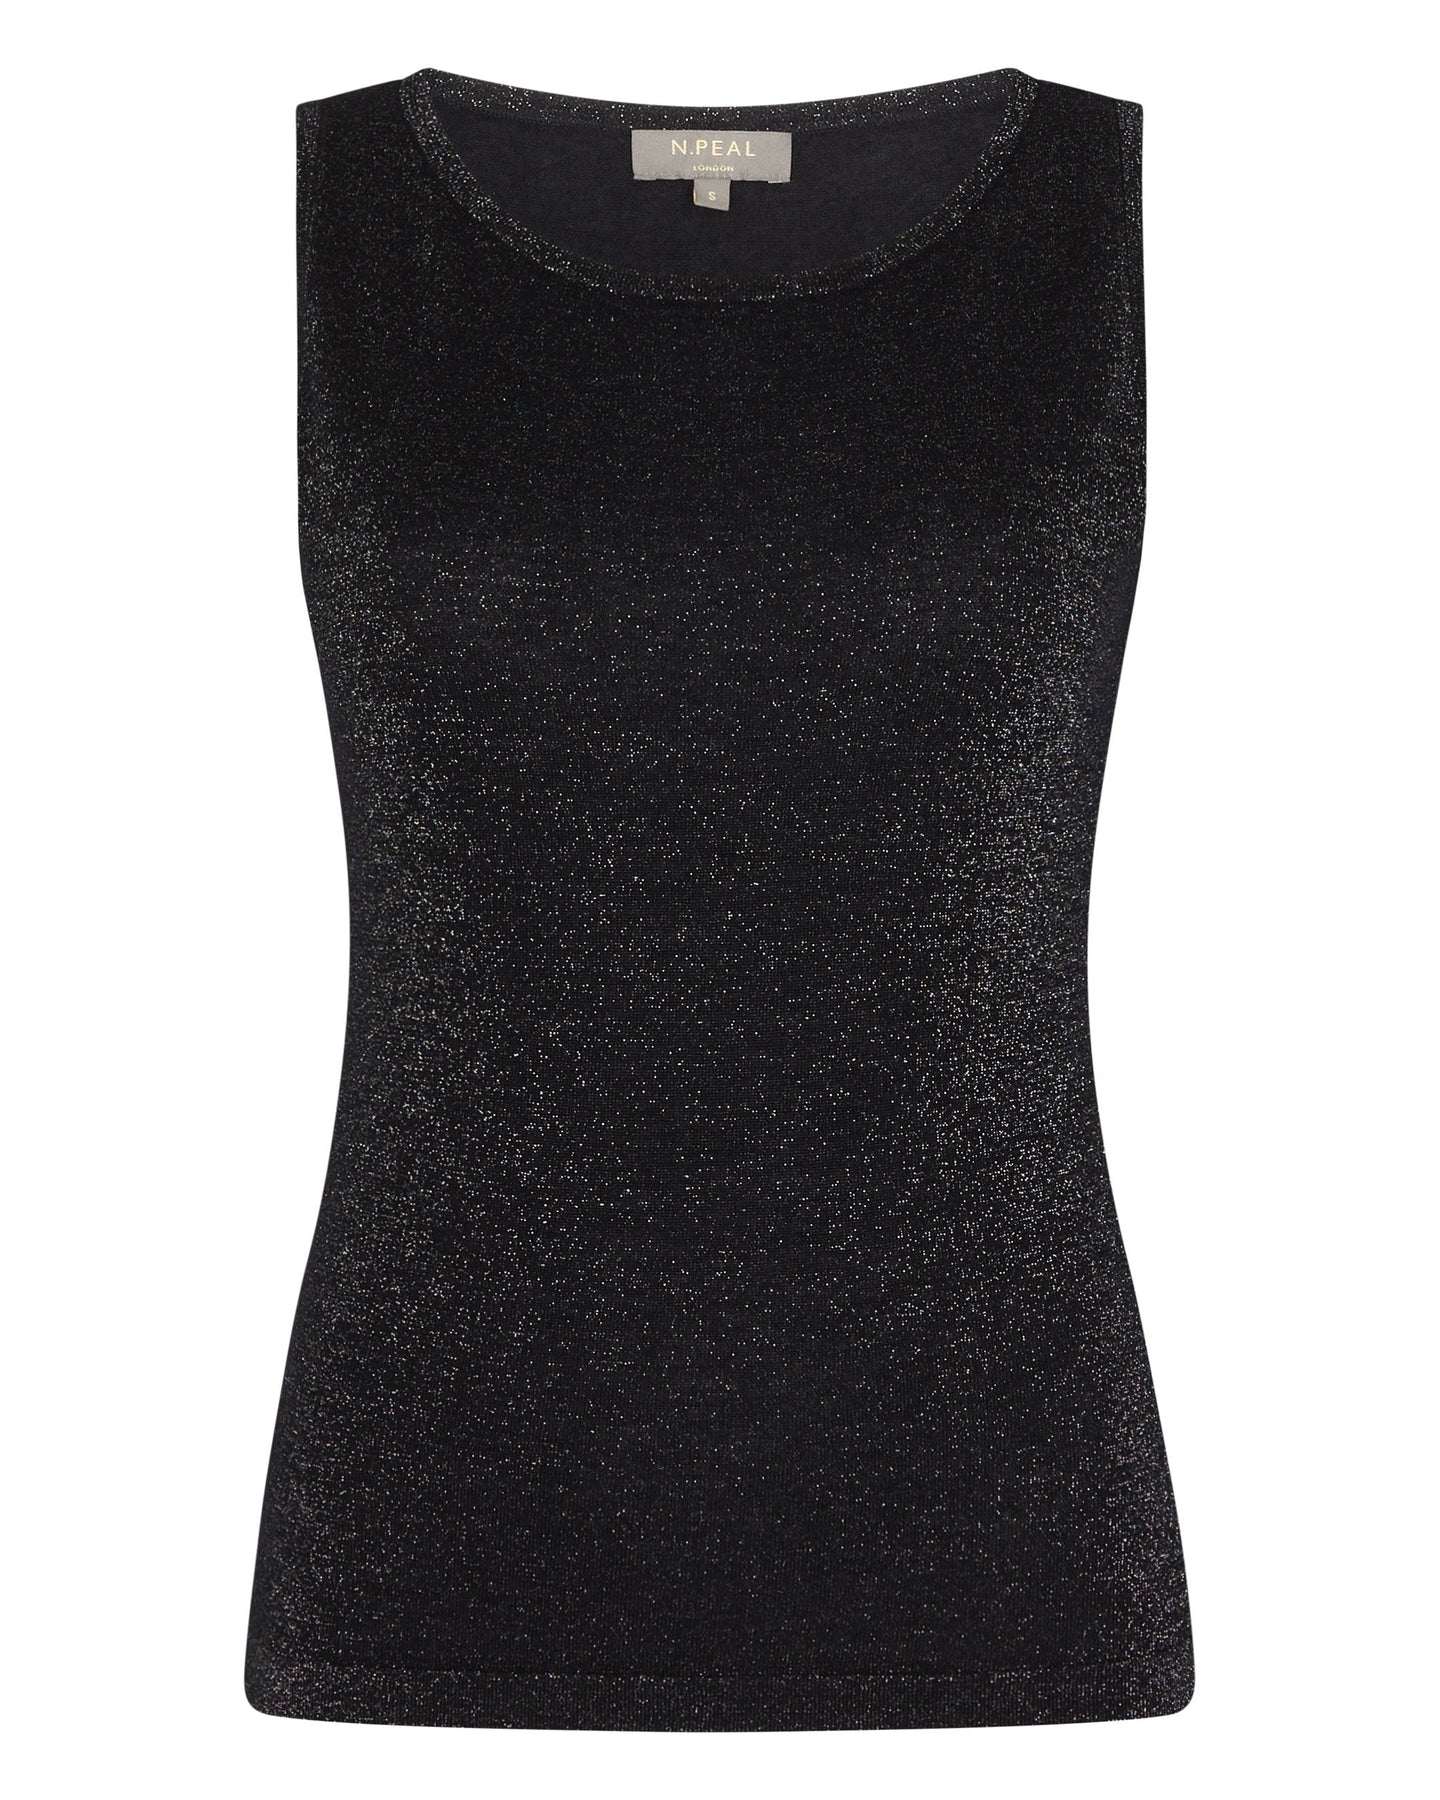 N.Peal Women's Superfine Cashmere Shell Top With Lurex Black Sparkle